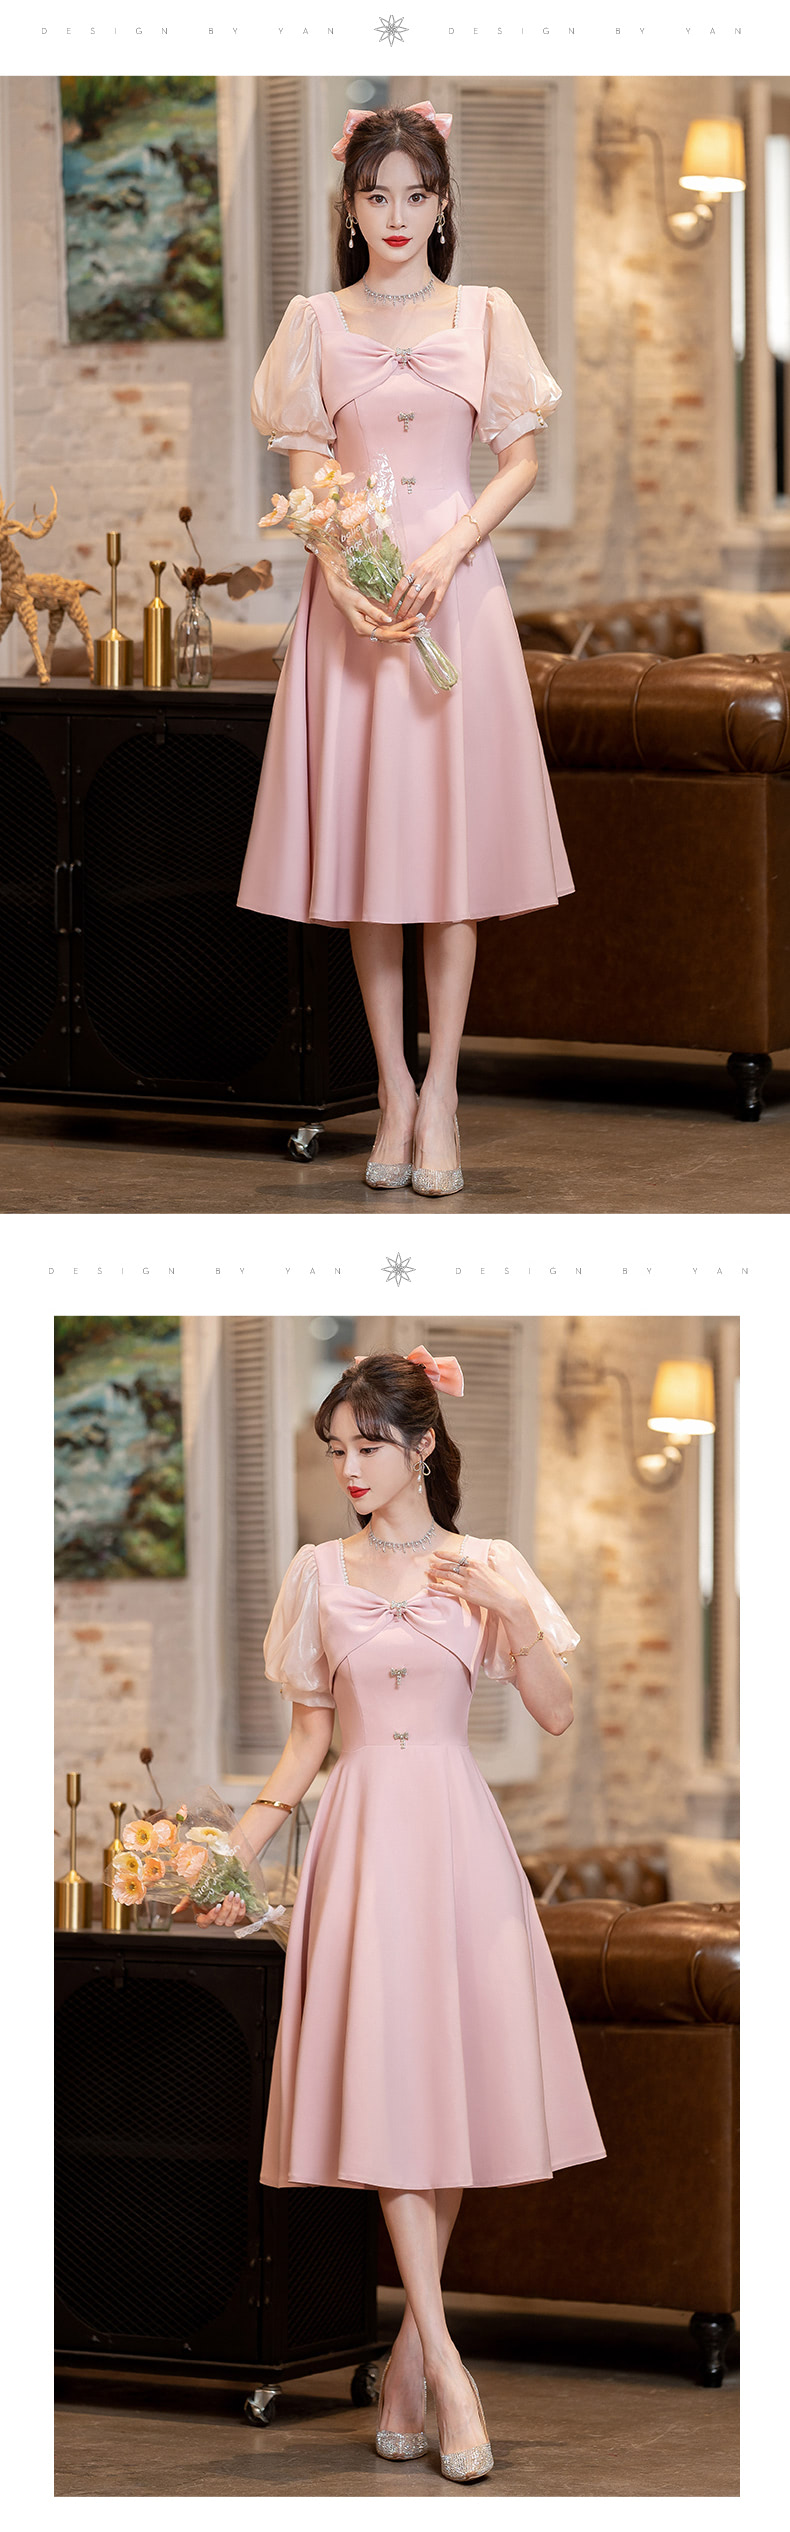 Modest-Pink-Simple-Evening-Prom-Midi-Dress-for-Party-Homecoming10.jpg